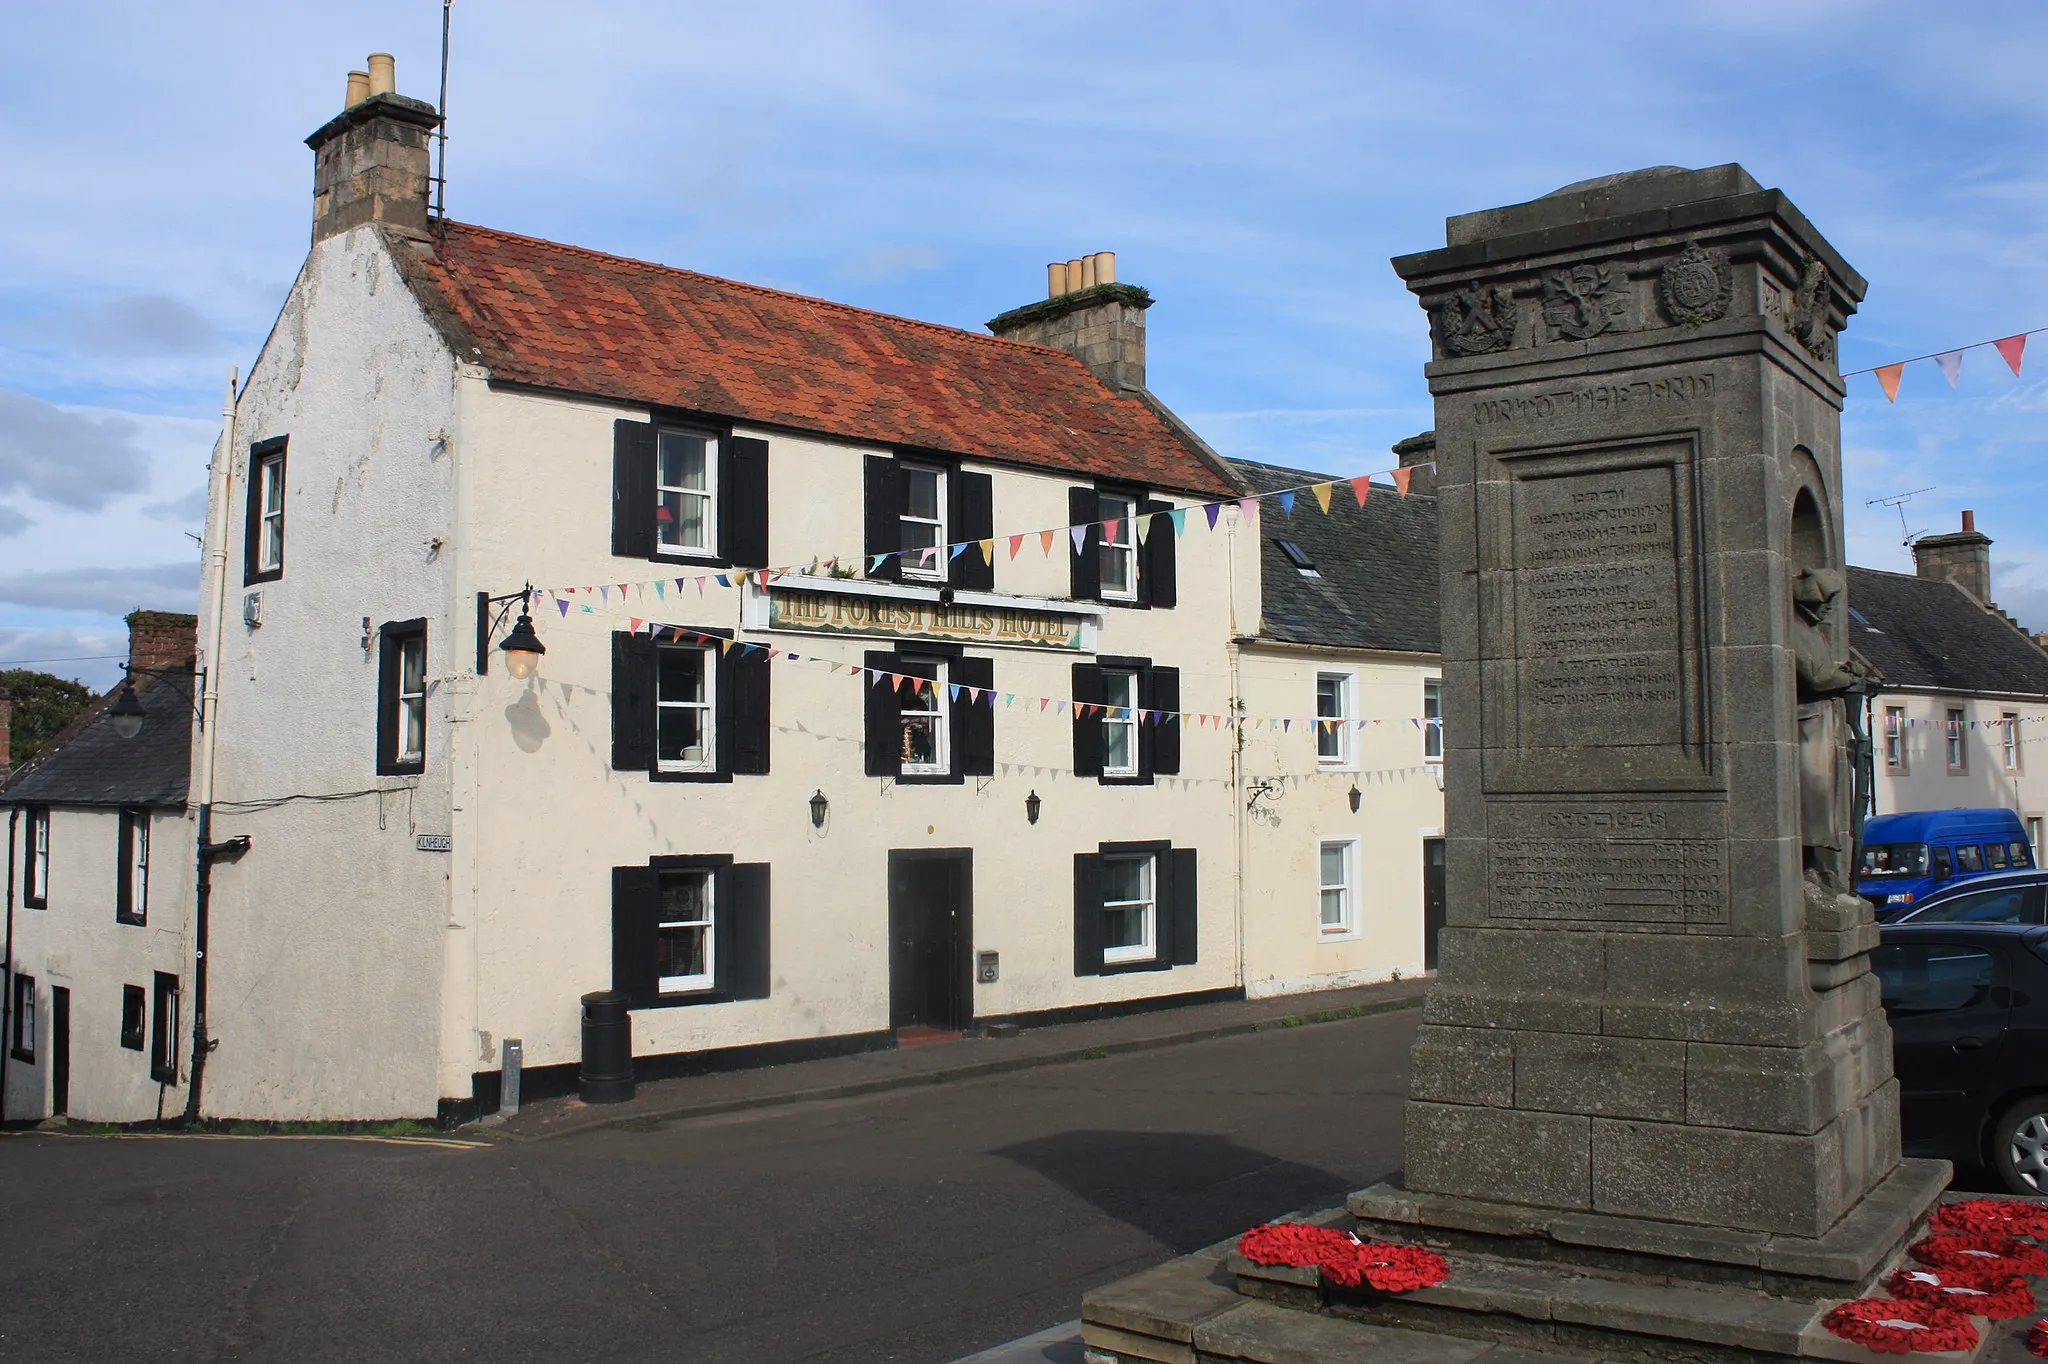 Photo showing: Auchtermuchty war memorial in the old market square